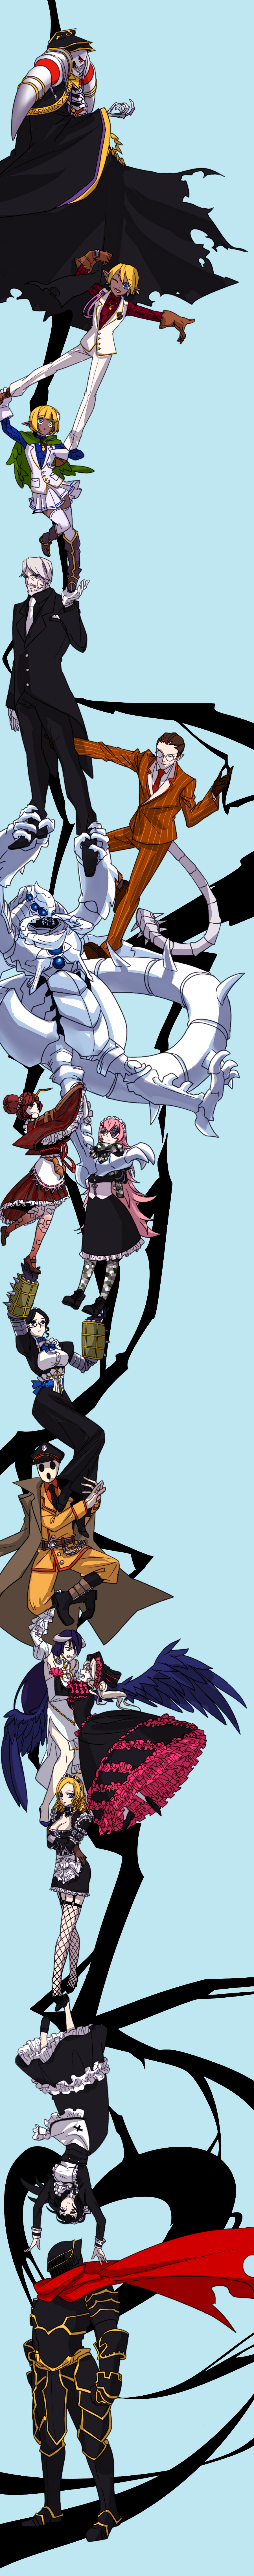 6+girls absurdres ainz_ooal_gown aken albedo armor aura_bella_fiora blonde_hair blue_background blue_eyes boots butler camouflage cape capelet cocytus_(overlord) cross cz2128_delta dark_skin demiurge durarara!! entoma_vasilissa_zeta eyepatch facial_hair formal glasses goatee grin heterochromia highres horns jewelry long_hair long_image looking_at_another maid mare_bello_fiore multiple_boys multiple_girls narberal_gamma necklace necktie open_mouth overlord_(maruyama) pandora's_actor pants parody parted_lips pink_hair pleated_skirt red_eyes red_hair robe sebas_tian shalltear_bloodfallen shoes short_hair skeleton skirt smile solution_epsilon suit tall_image thighhighs trust_me vest white_hair wings yellow_eyes yuri_alpha zettai_ryouiki